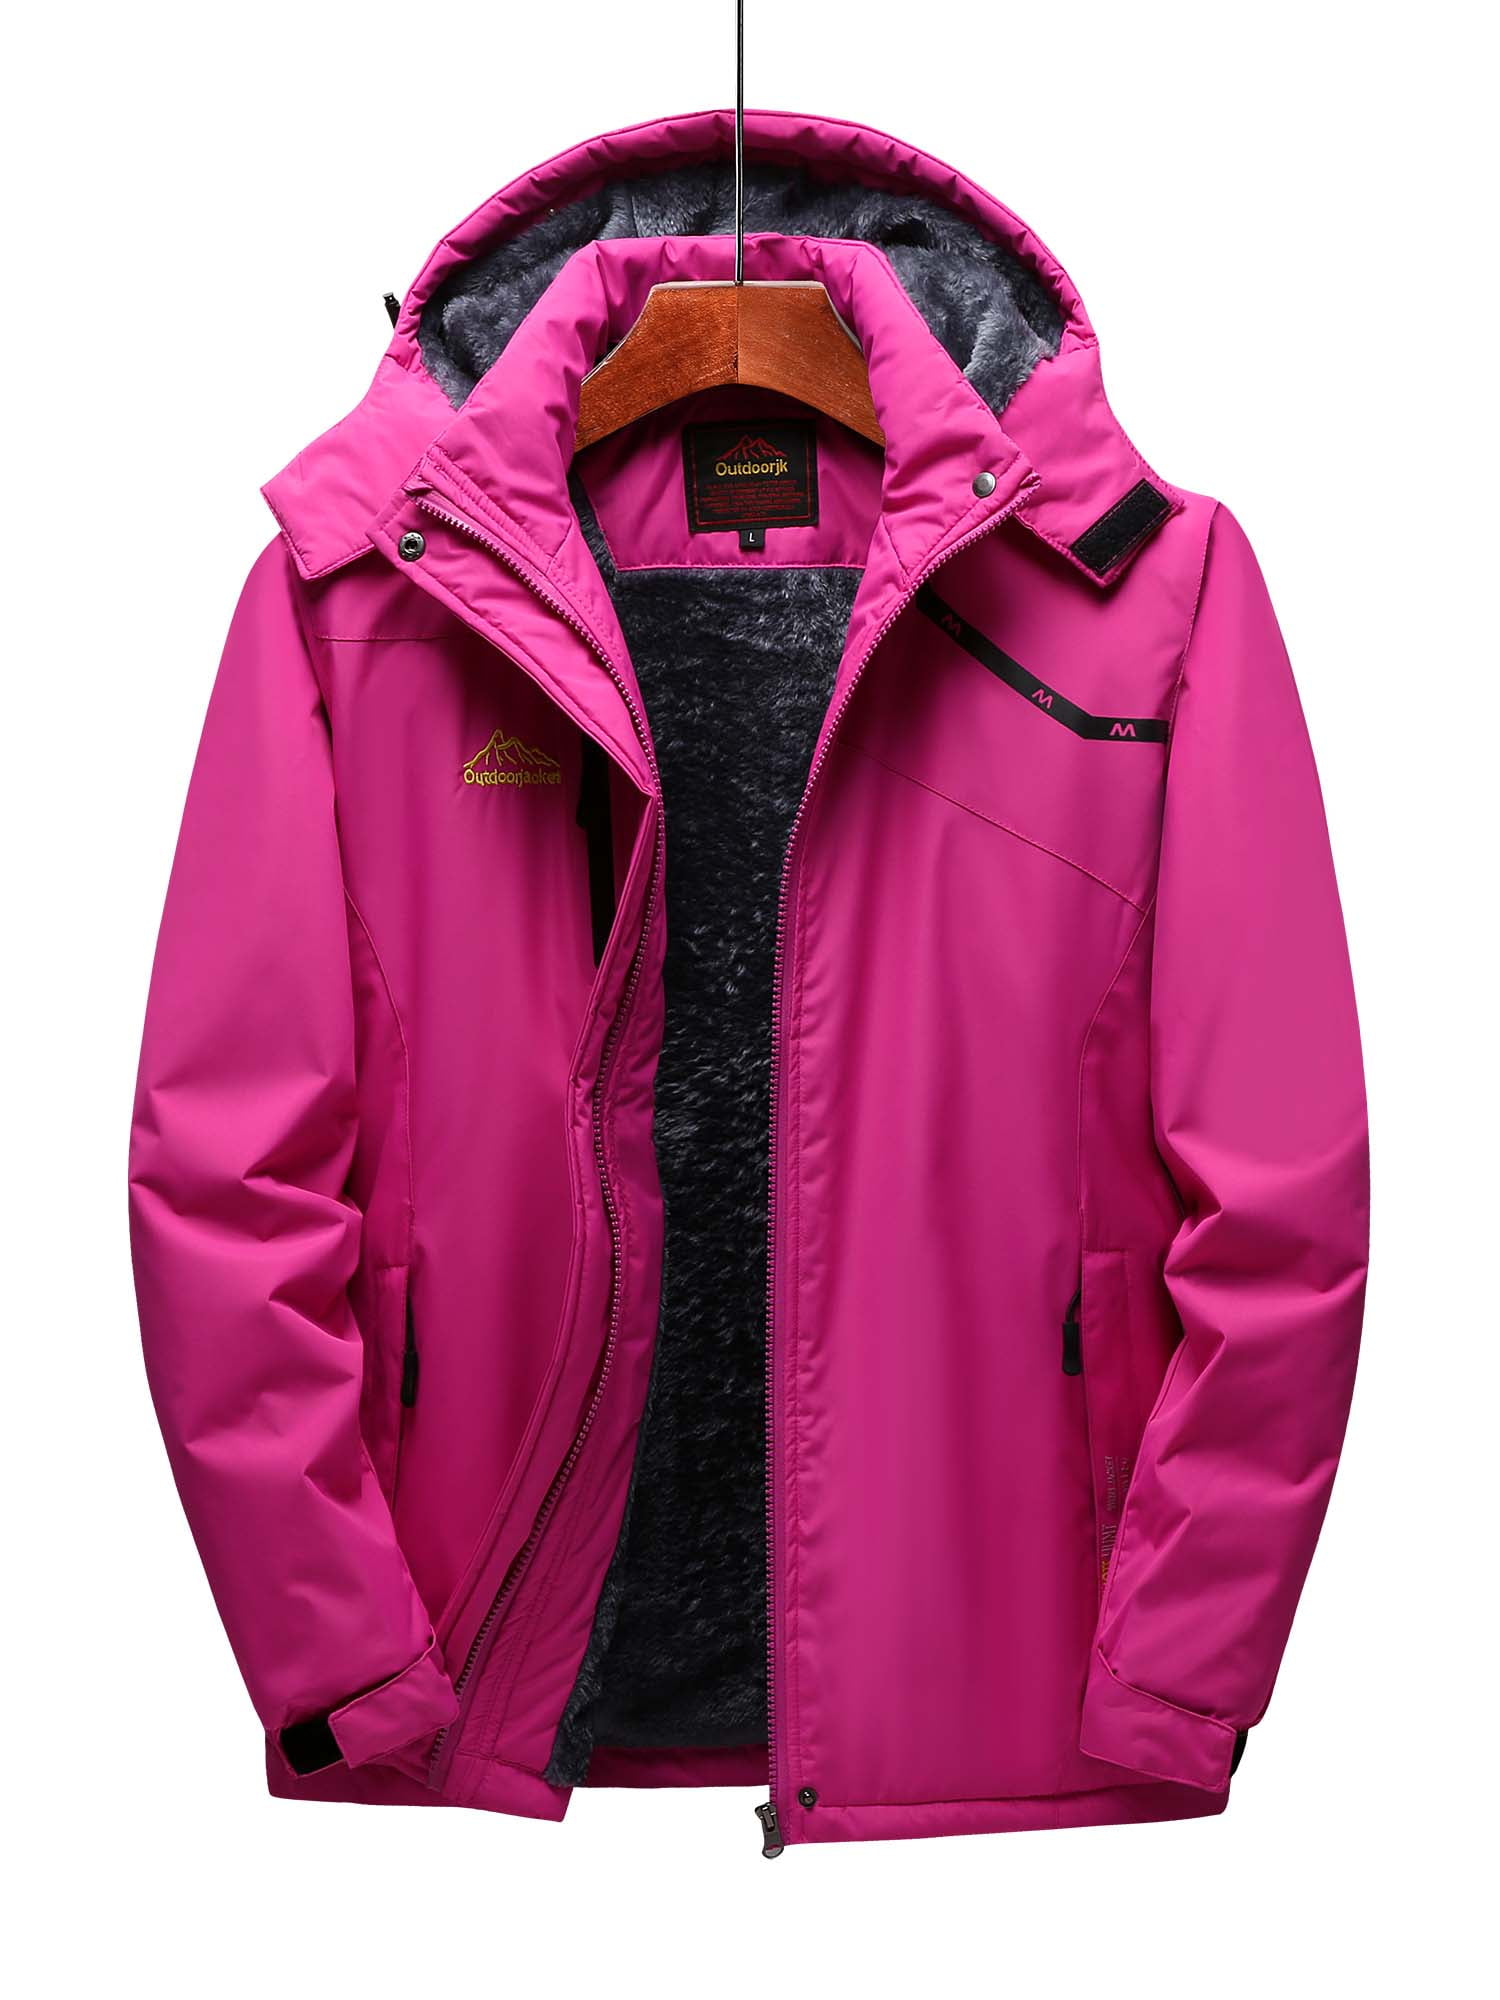 RESULT OUTER LONG JACKET SOFTSHELL FLEECE INNER EXTRA WARM COAT LINED XS-4XL NEW 